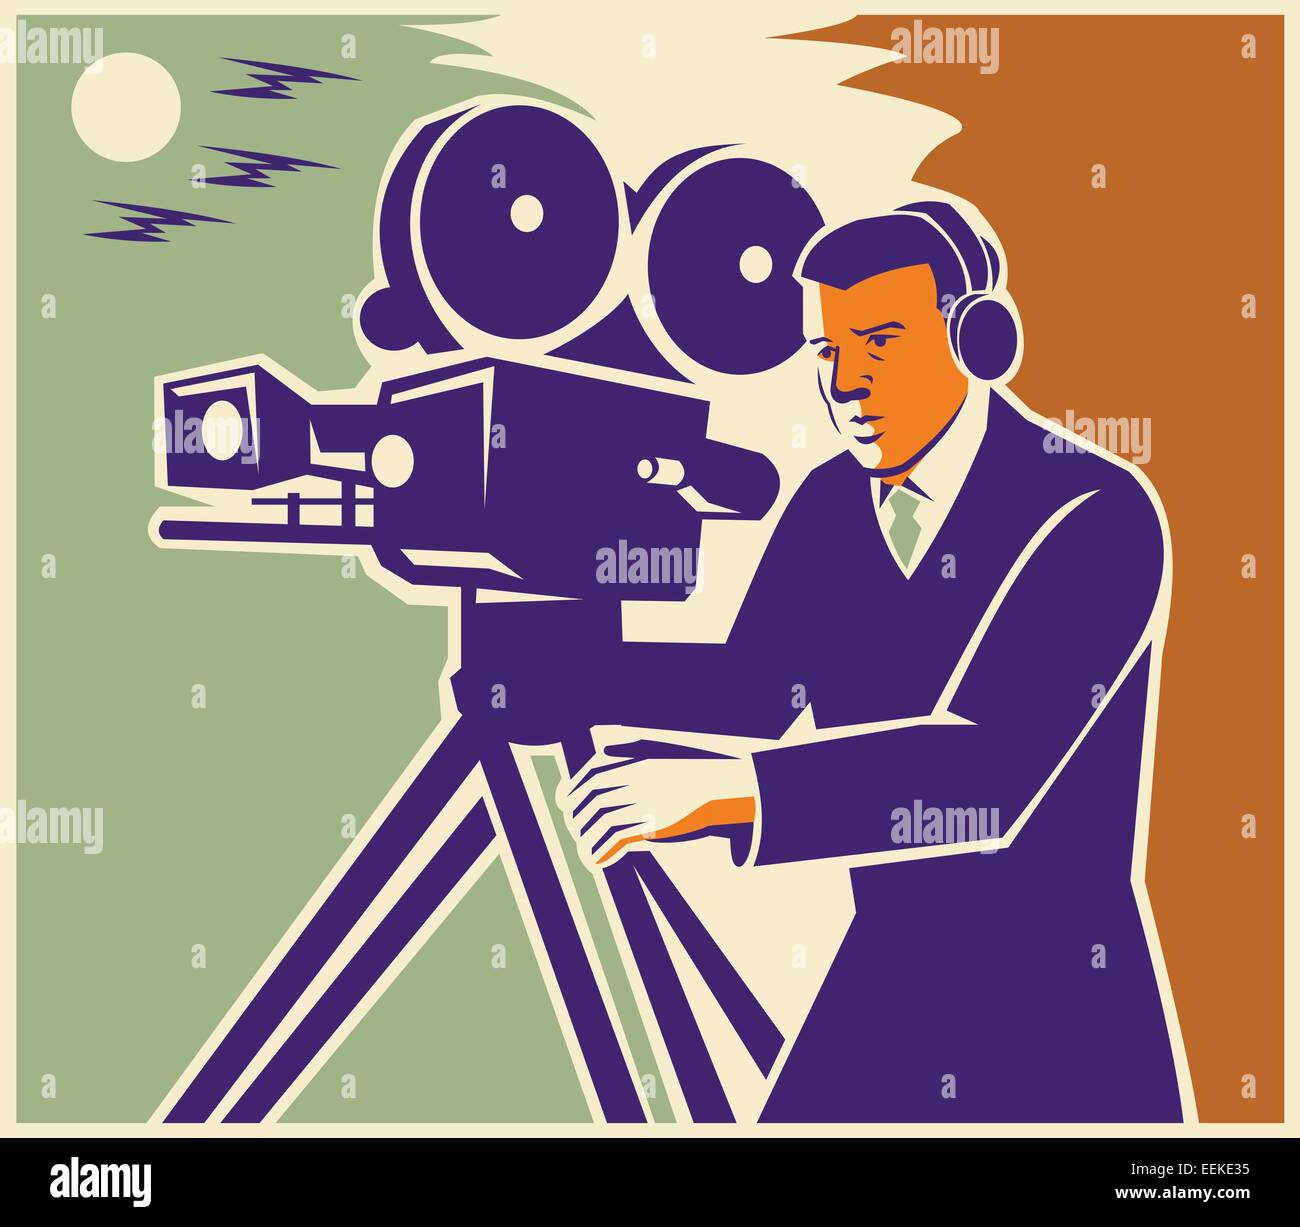 Illustration of a cameraman filmmaker moviemaker with vintage movie camera filming at night with moon and birds flying in the background done in retro style. Stock Photo